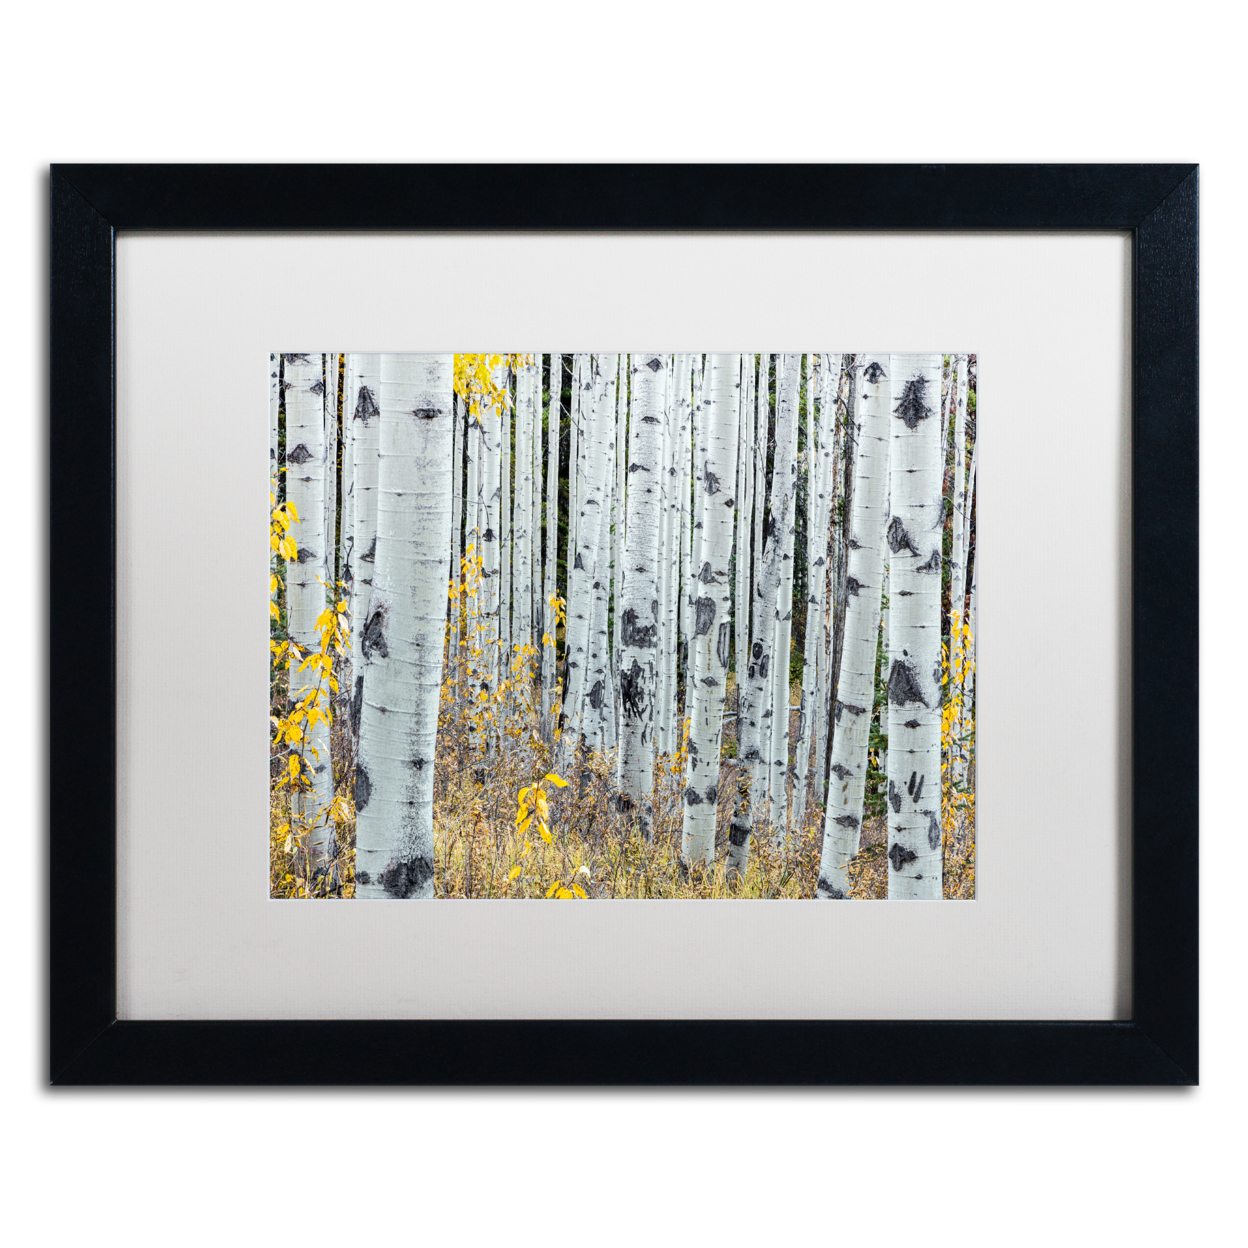 Pierre Leclerc 'Forest Of Aspens' Black Wooden Framed Art 18 X 22 Inches